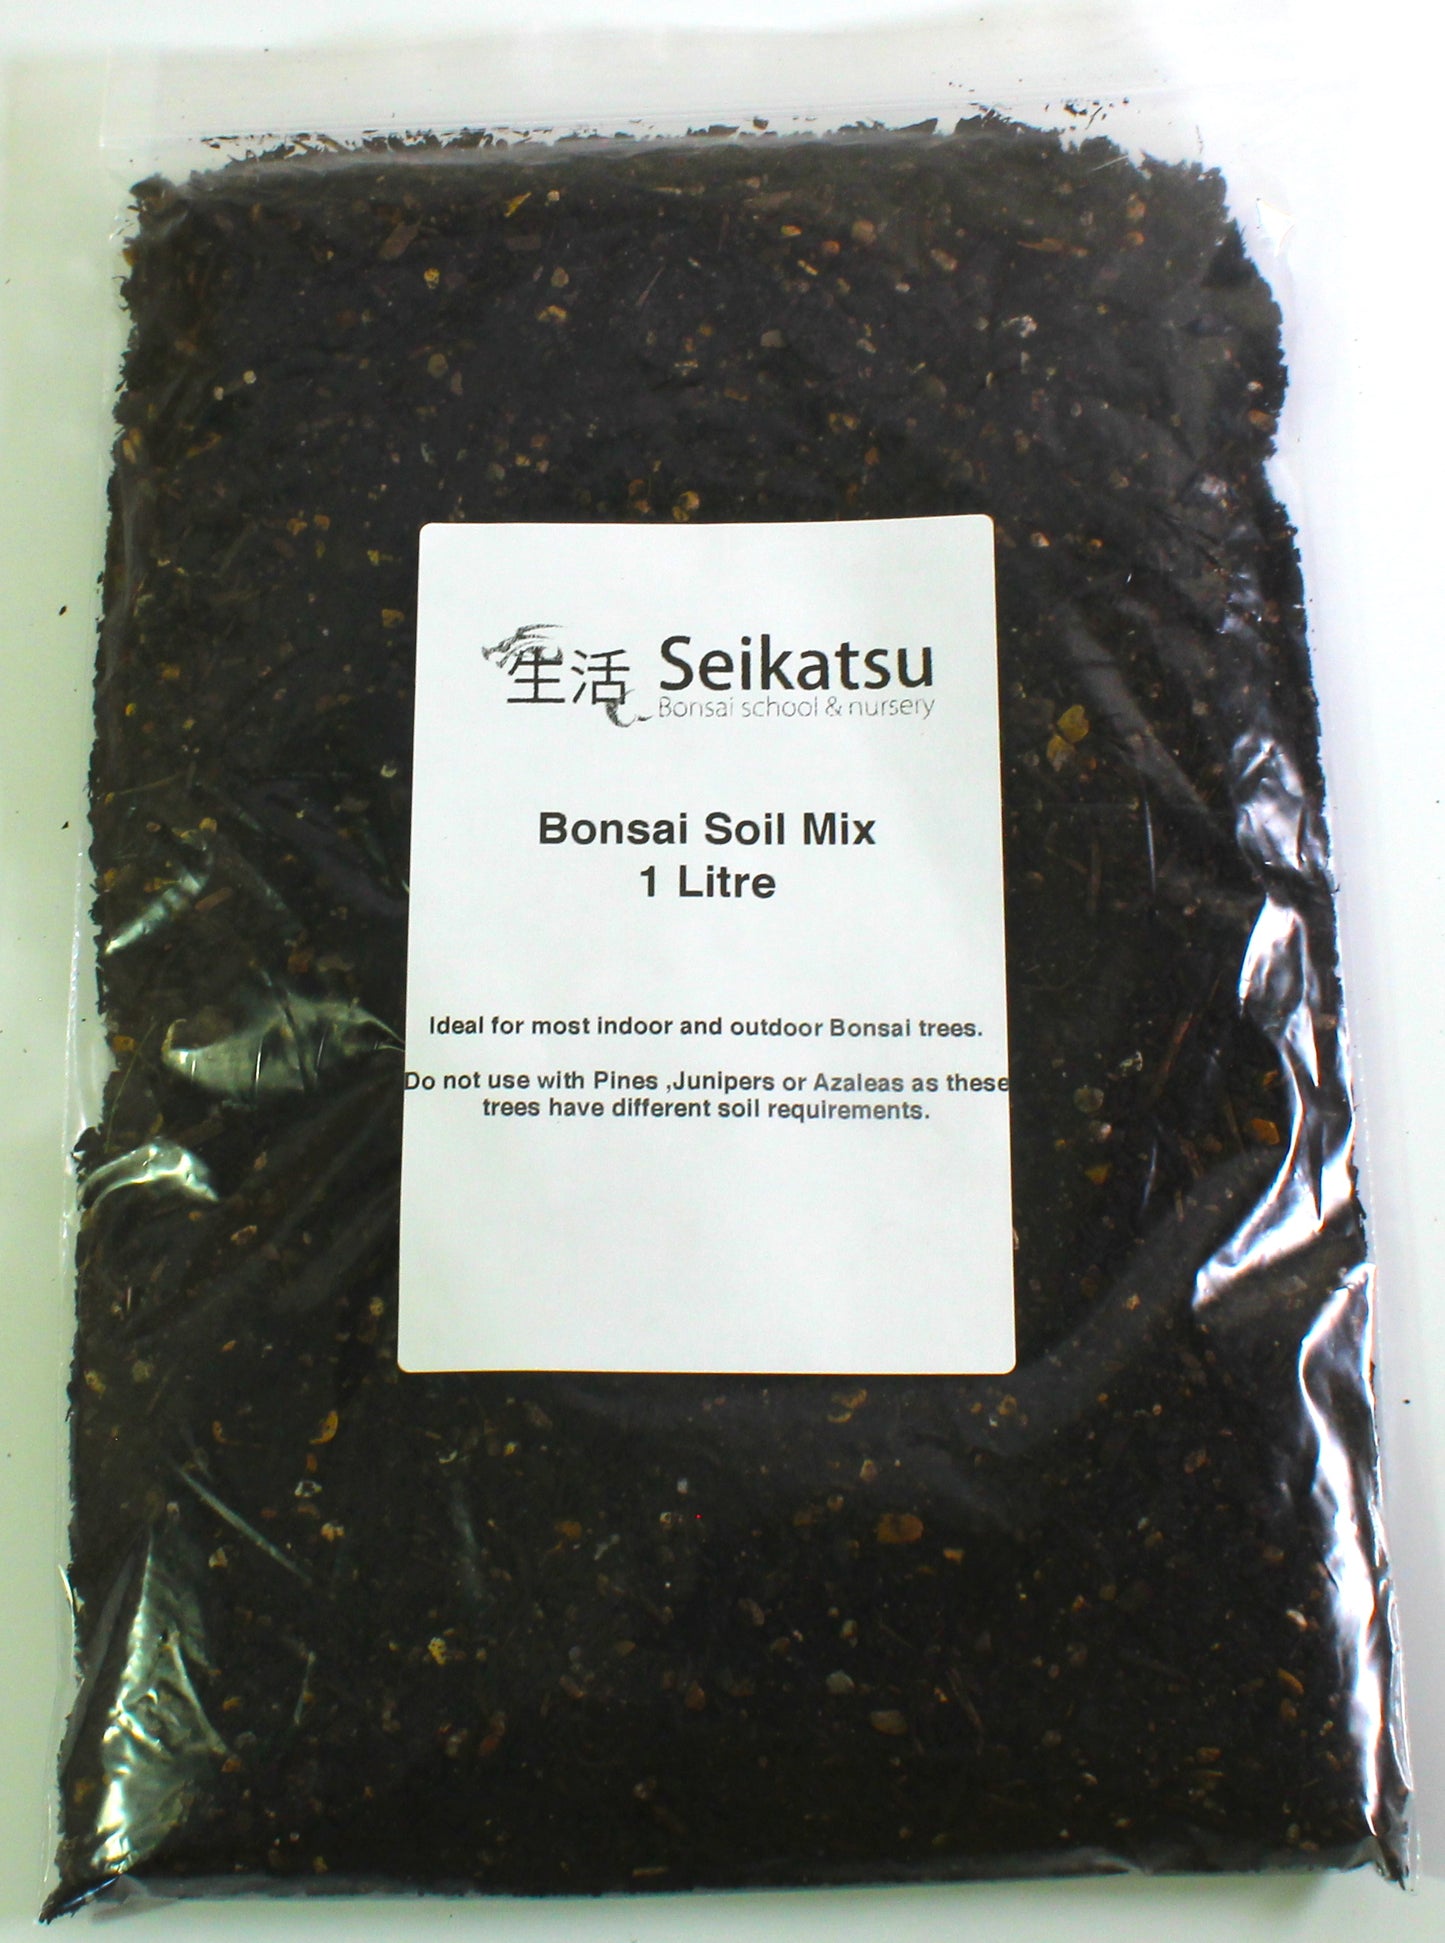 Bonsai Soil premixed and ready to use - choose the amount to suit you